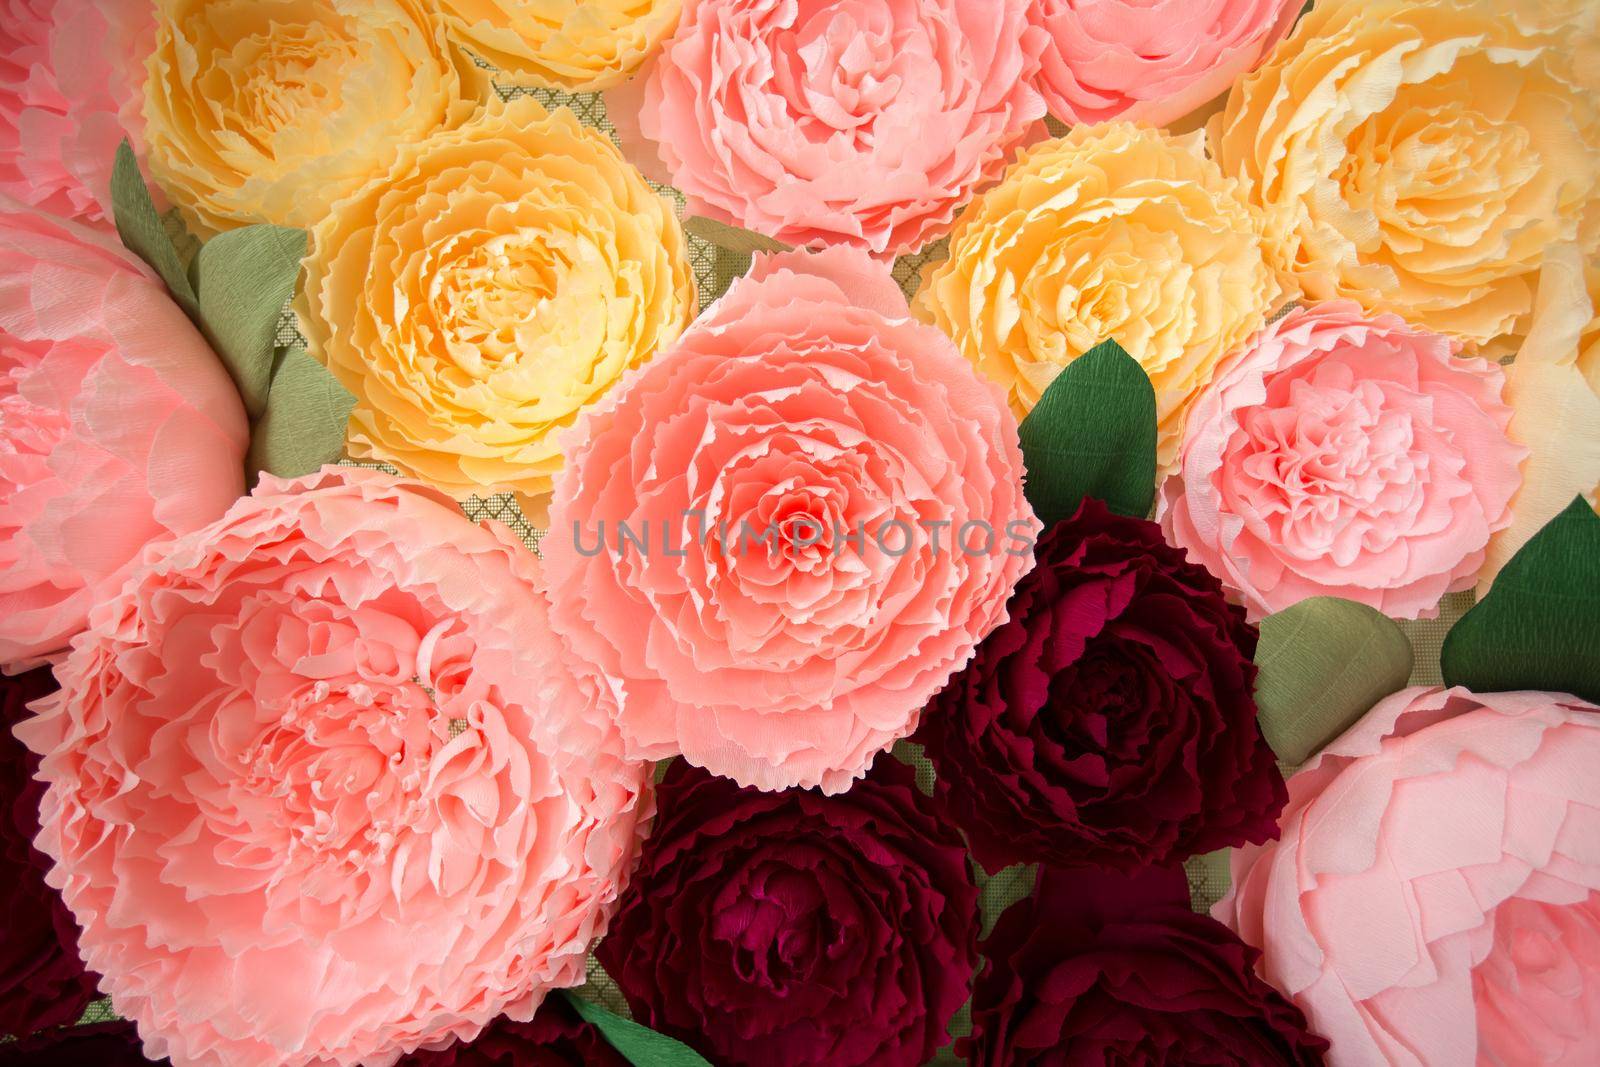 Colorful of artificial flower decoration. The fabric flowers bouquet by StudioPeace